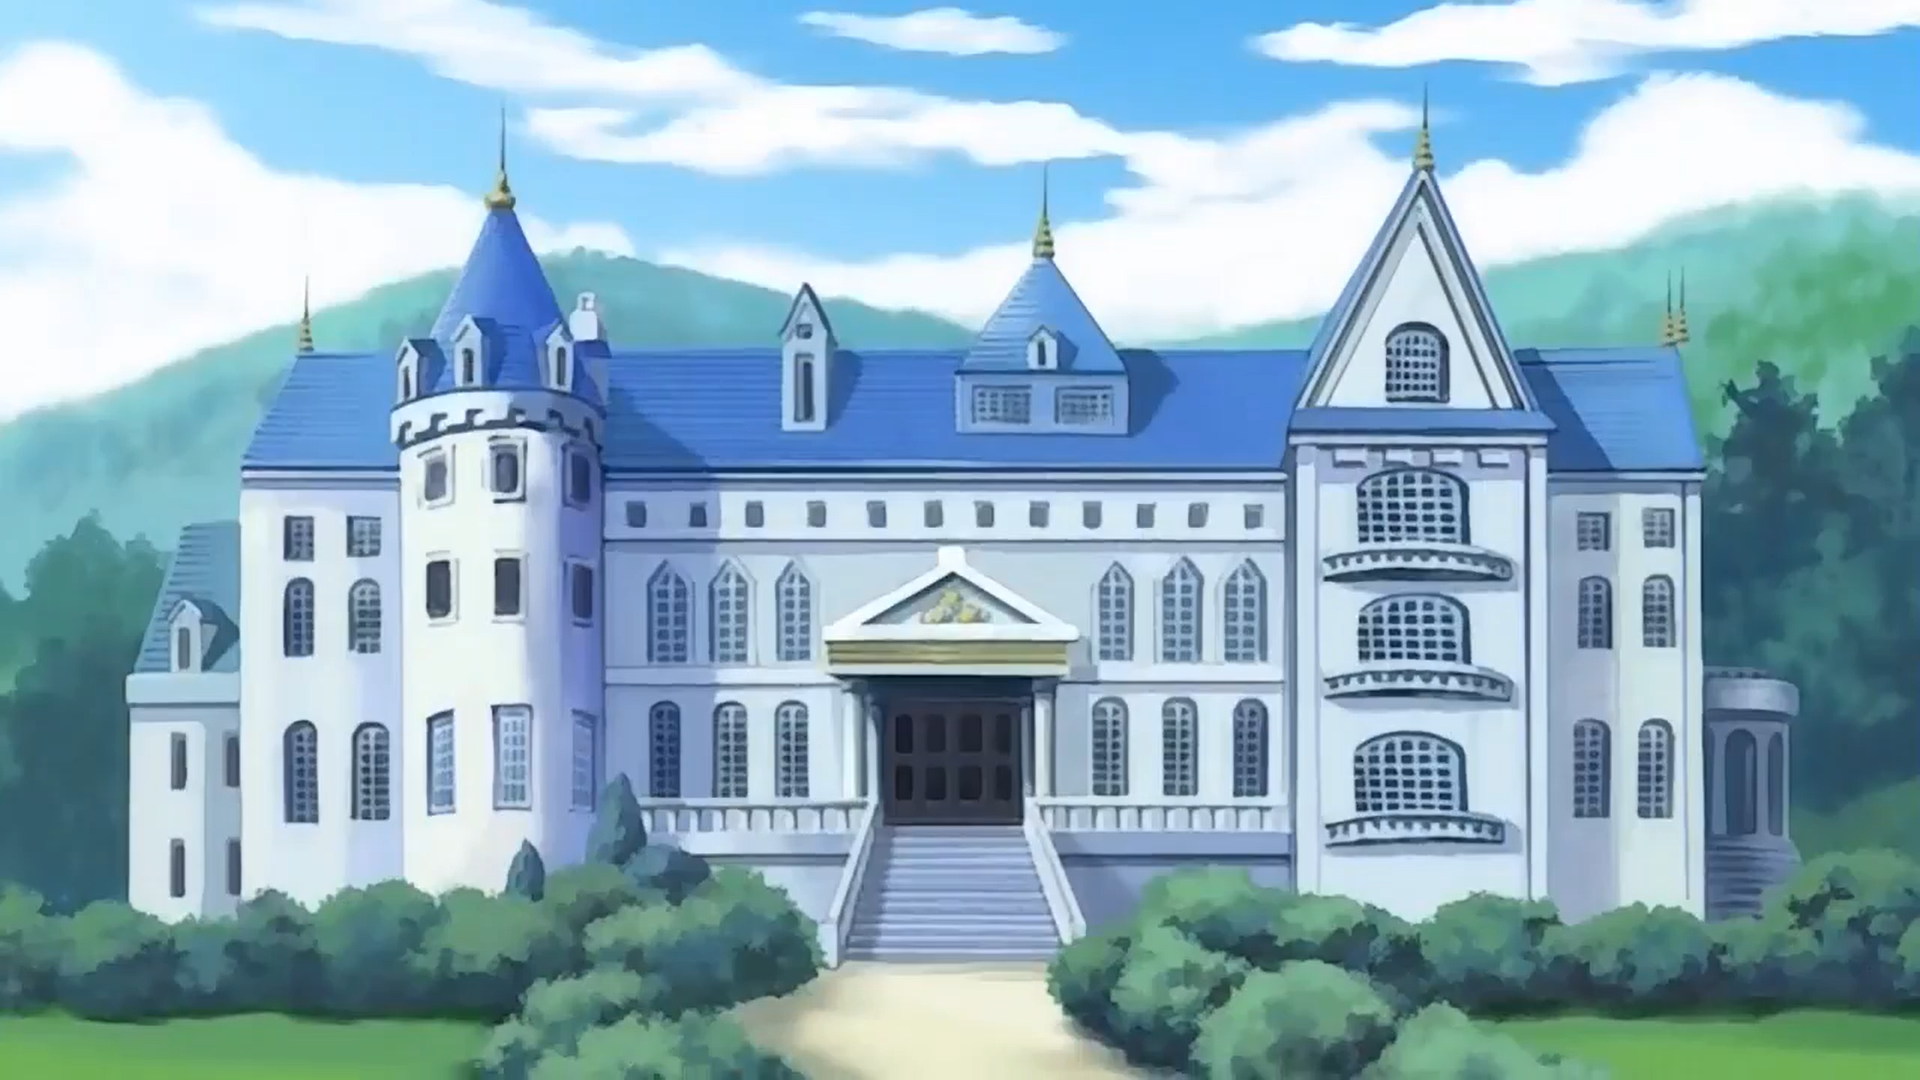 Kelvin Paul Marchioro - Re:Zero's Roswaal Mansion (WIP)